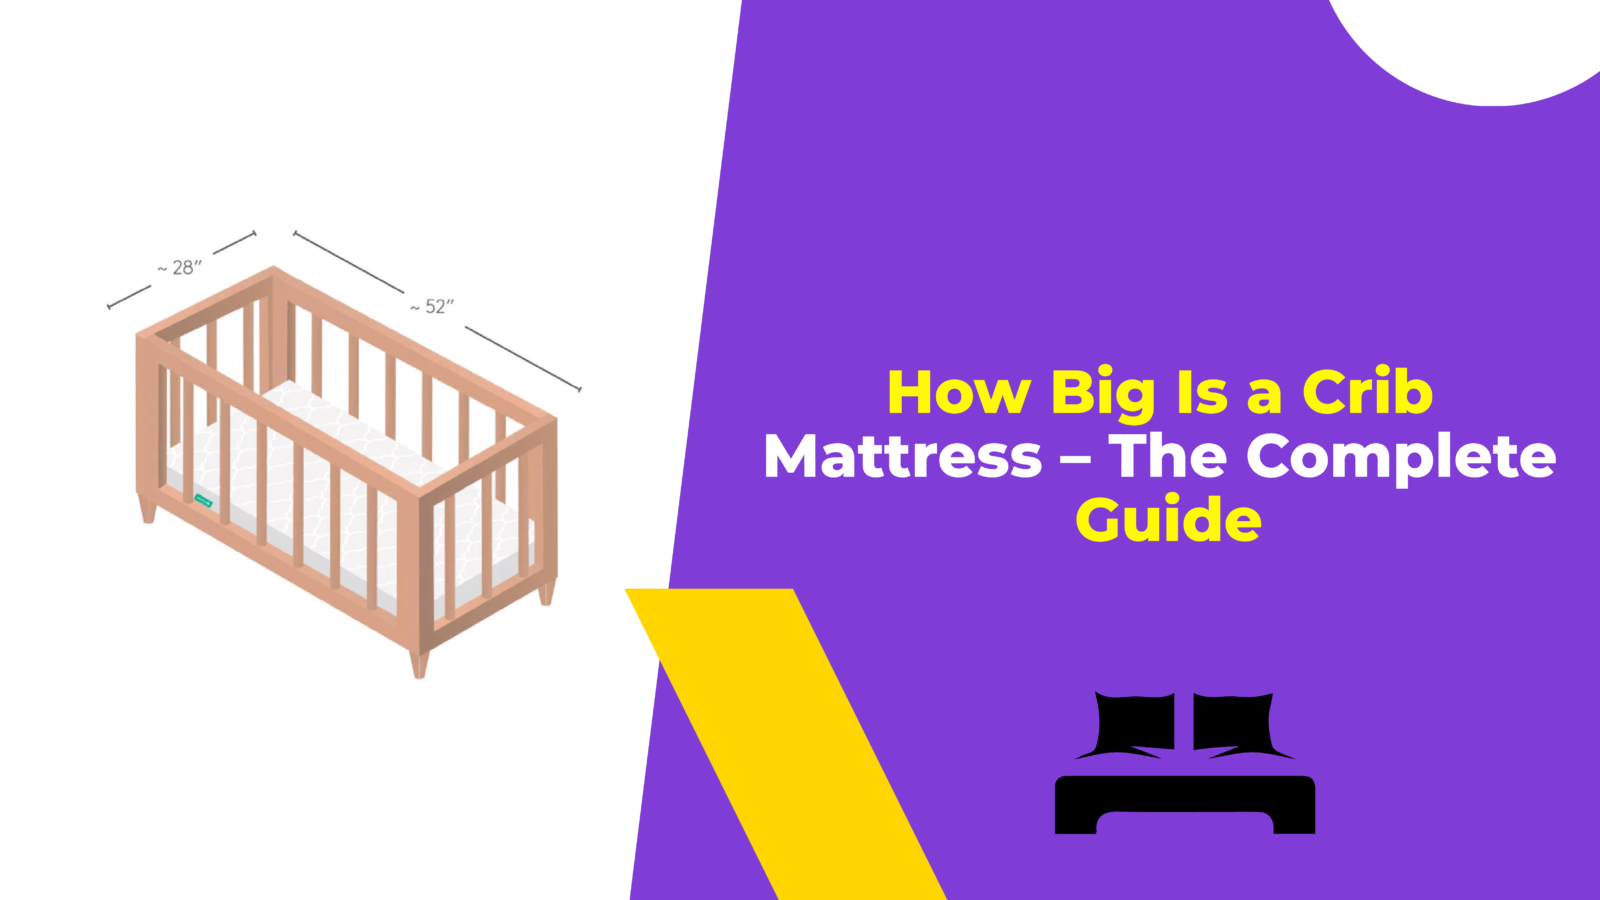 How Big Is a Crib Mattress - The Complete Guide